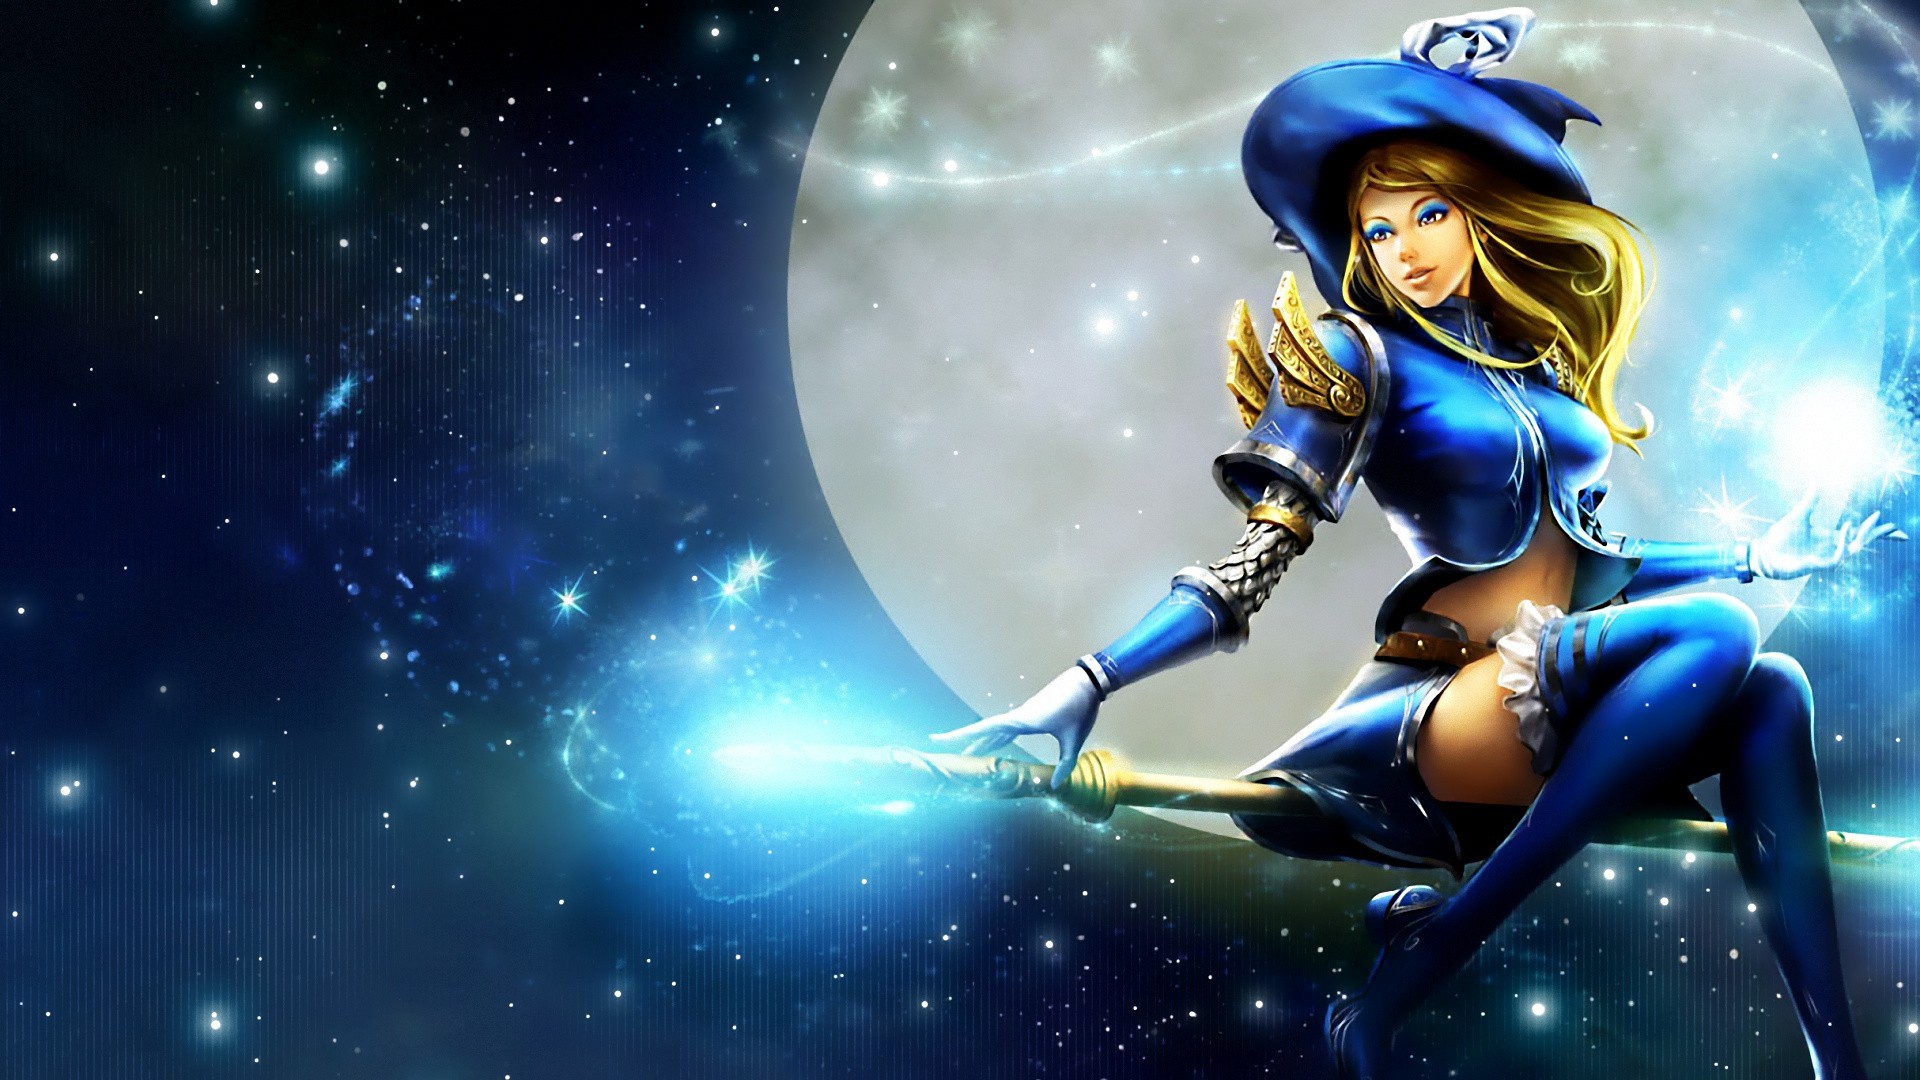 1920x1080 Wallpapers Blonde Witch on Her Broom HD Wallpapers Blonde Witch 